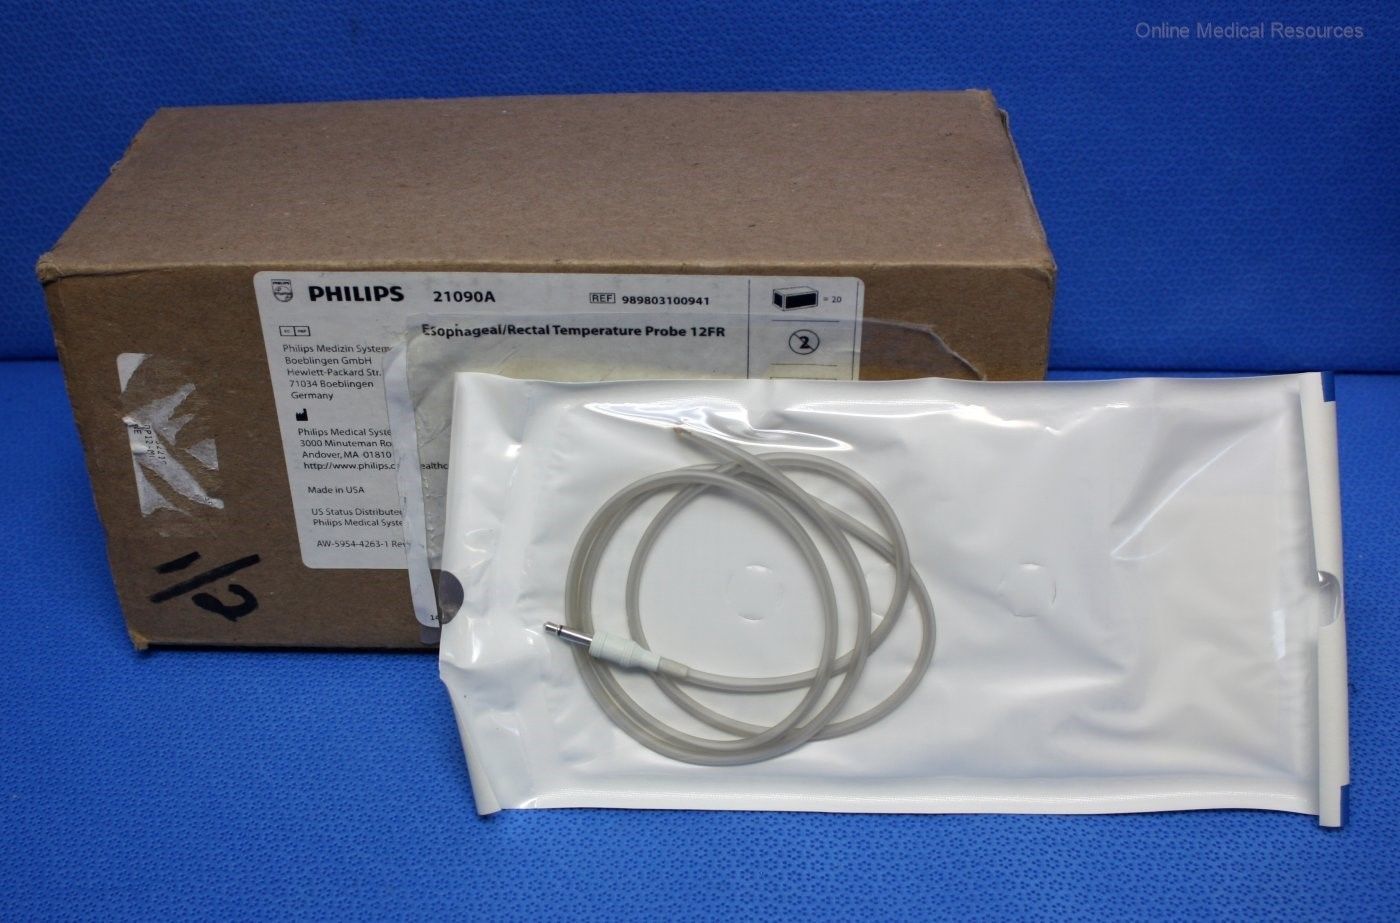 Philips 20 Each Esophageal Rectal Temperature Probe 21090a Series 400